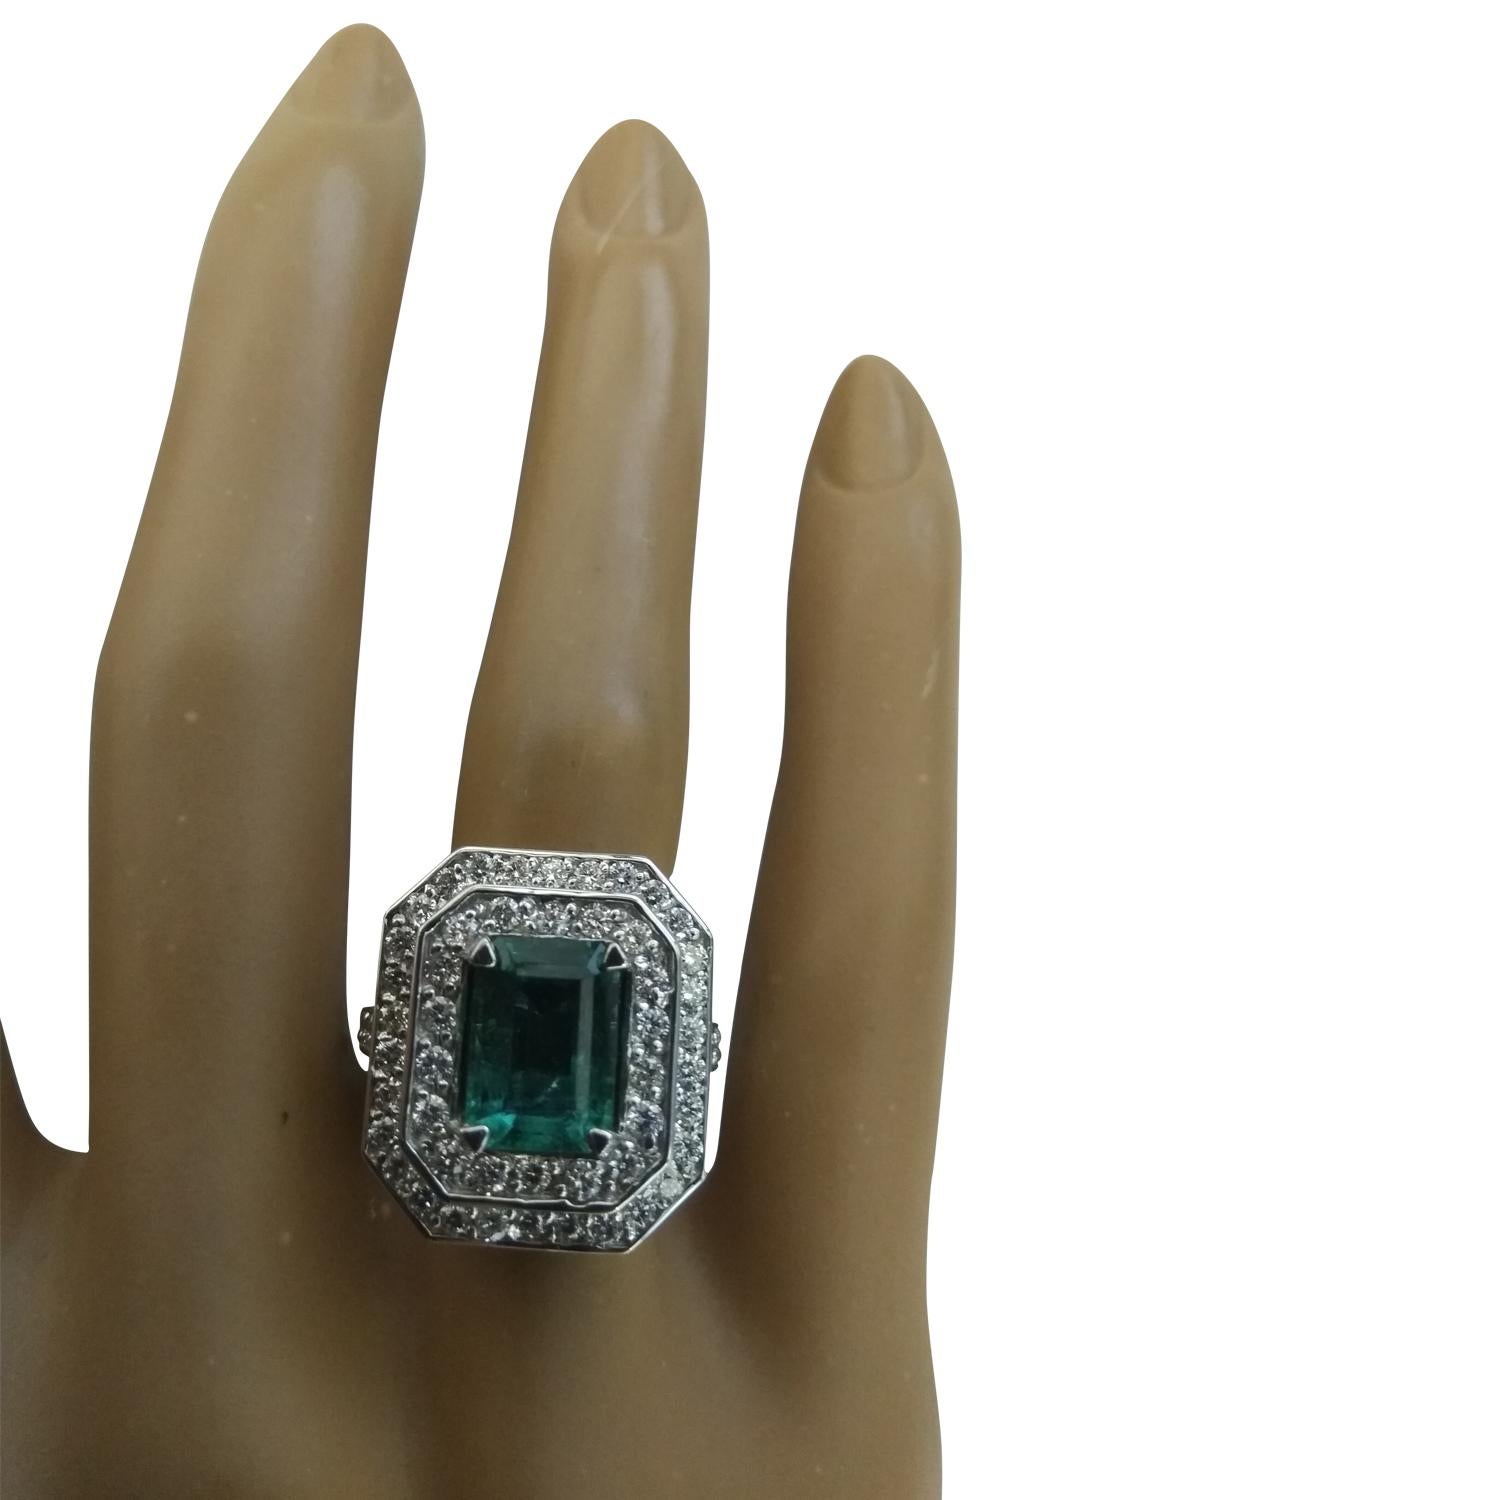 3.21 Carat Natural Emerald 14 Karat Solid White Gold Diamond Ring
Stamped: 14K 
Total Ring Weight: 10.4 Grams 
Emerald Weight 2.03 Carat (9.00x7.00 Millimeters)
Diamond Weight: 1.18 carat (F-G Color, VS2-SI1 Clarity )
Face Measures: 19.20x16.95